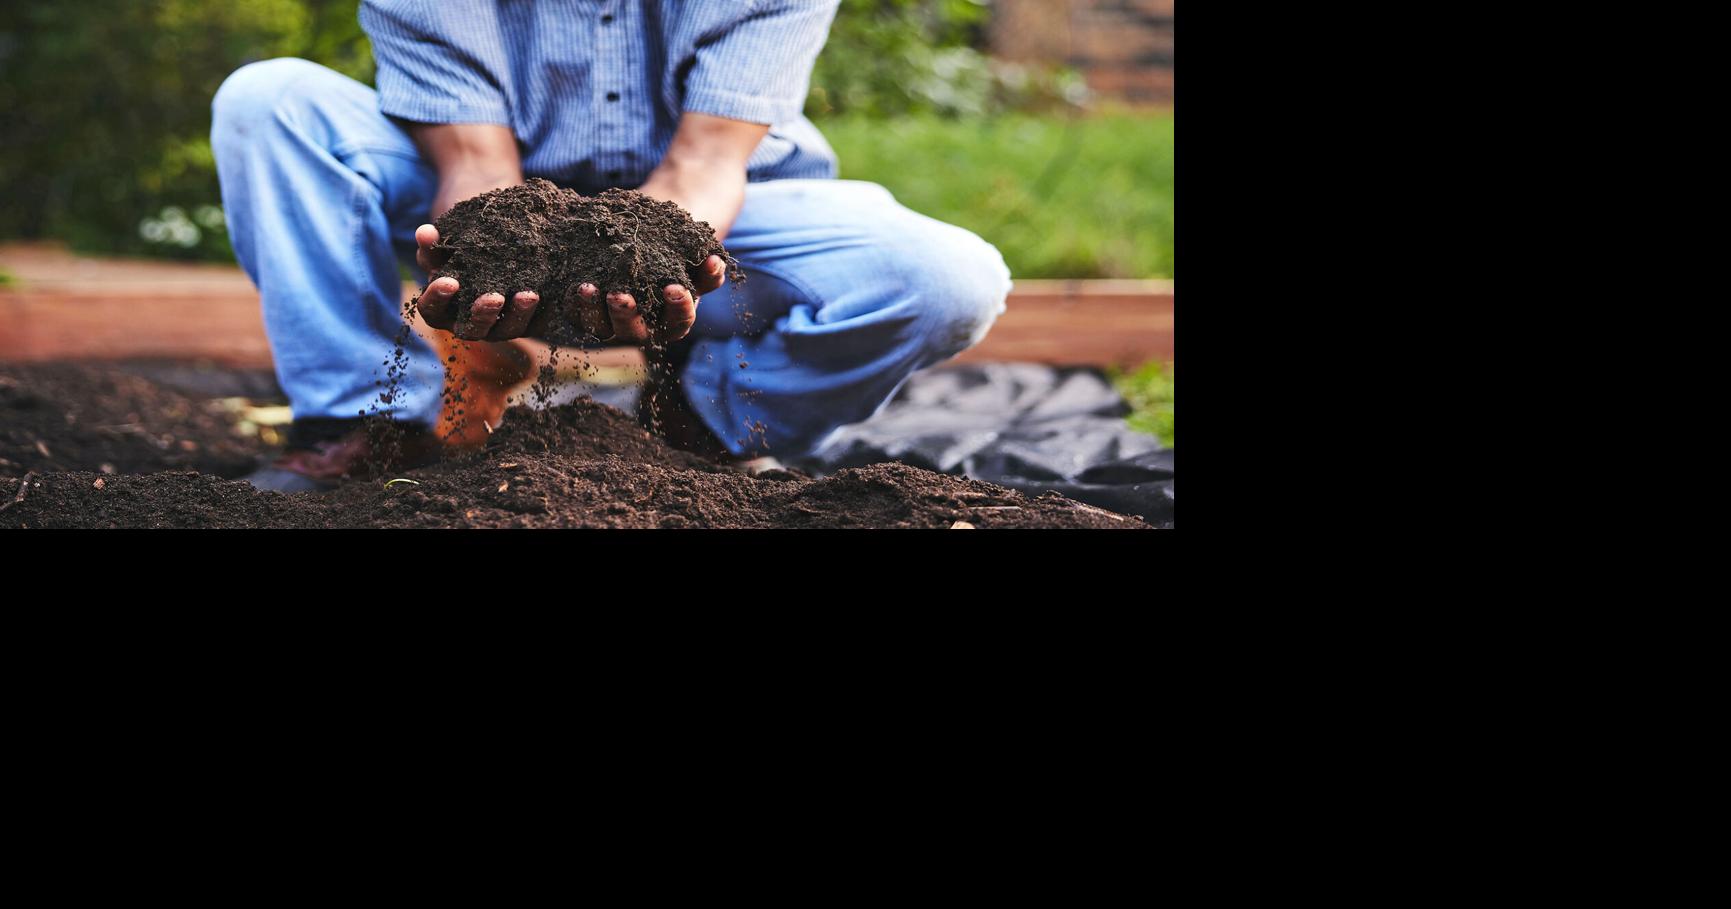 DOWN TO EARTH: The real dirt on composting